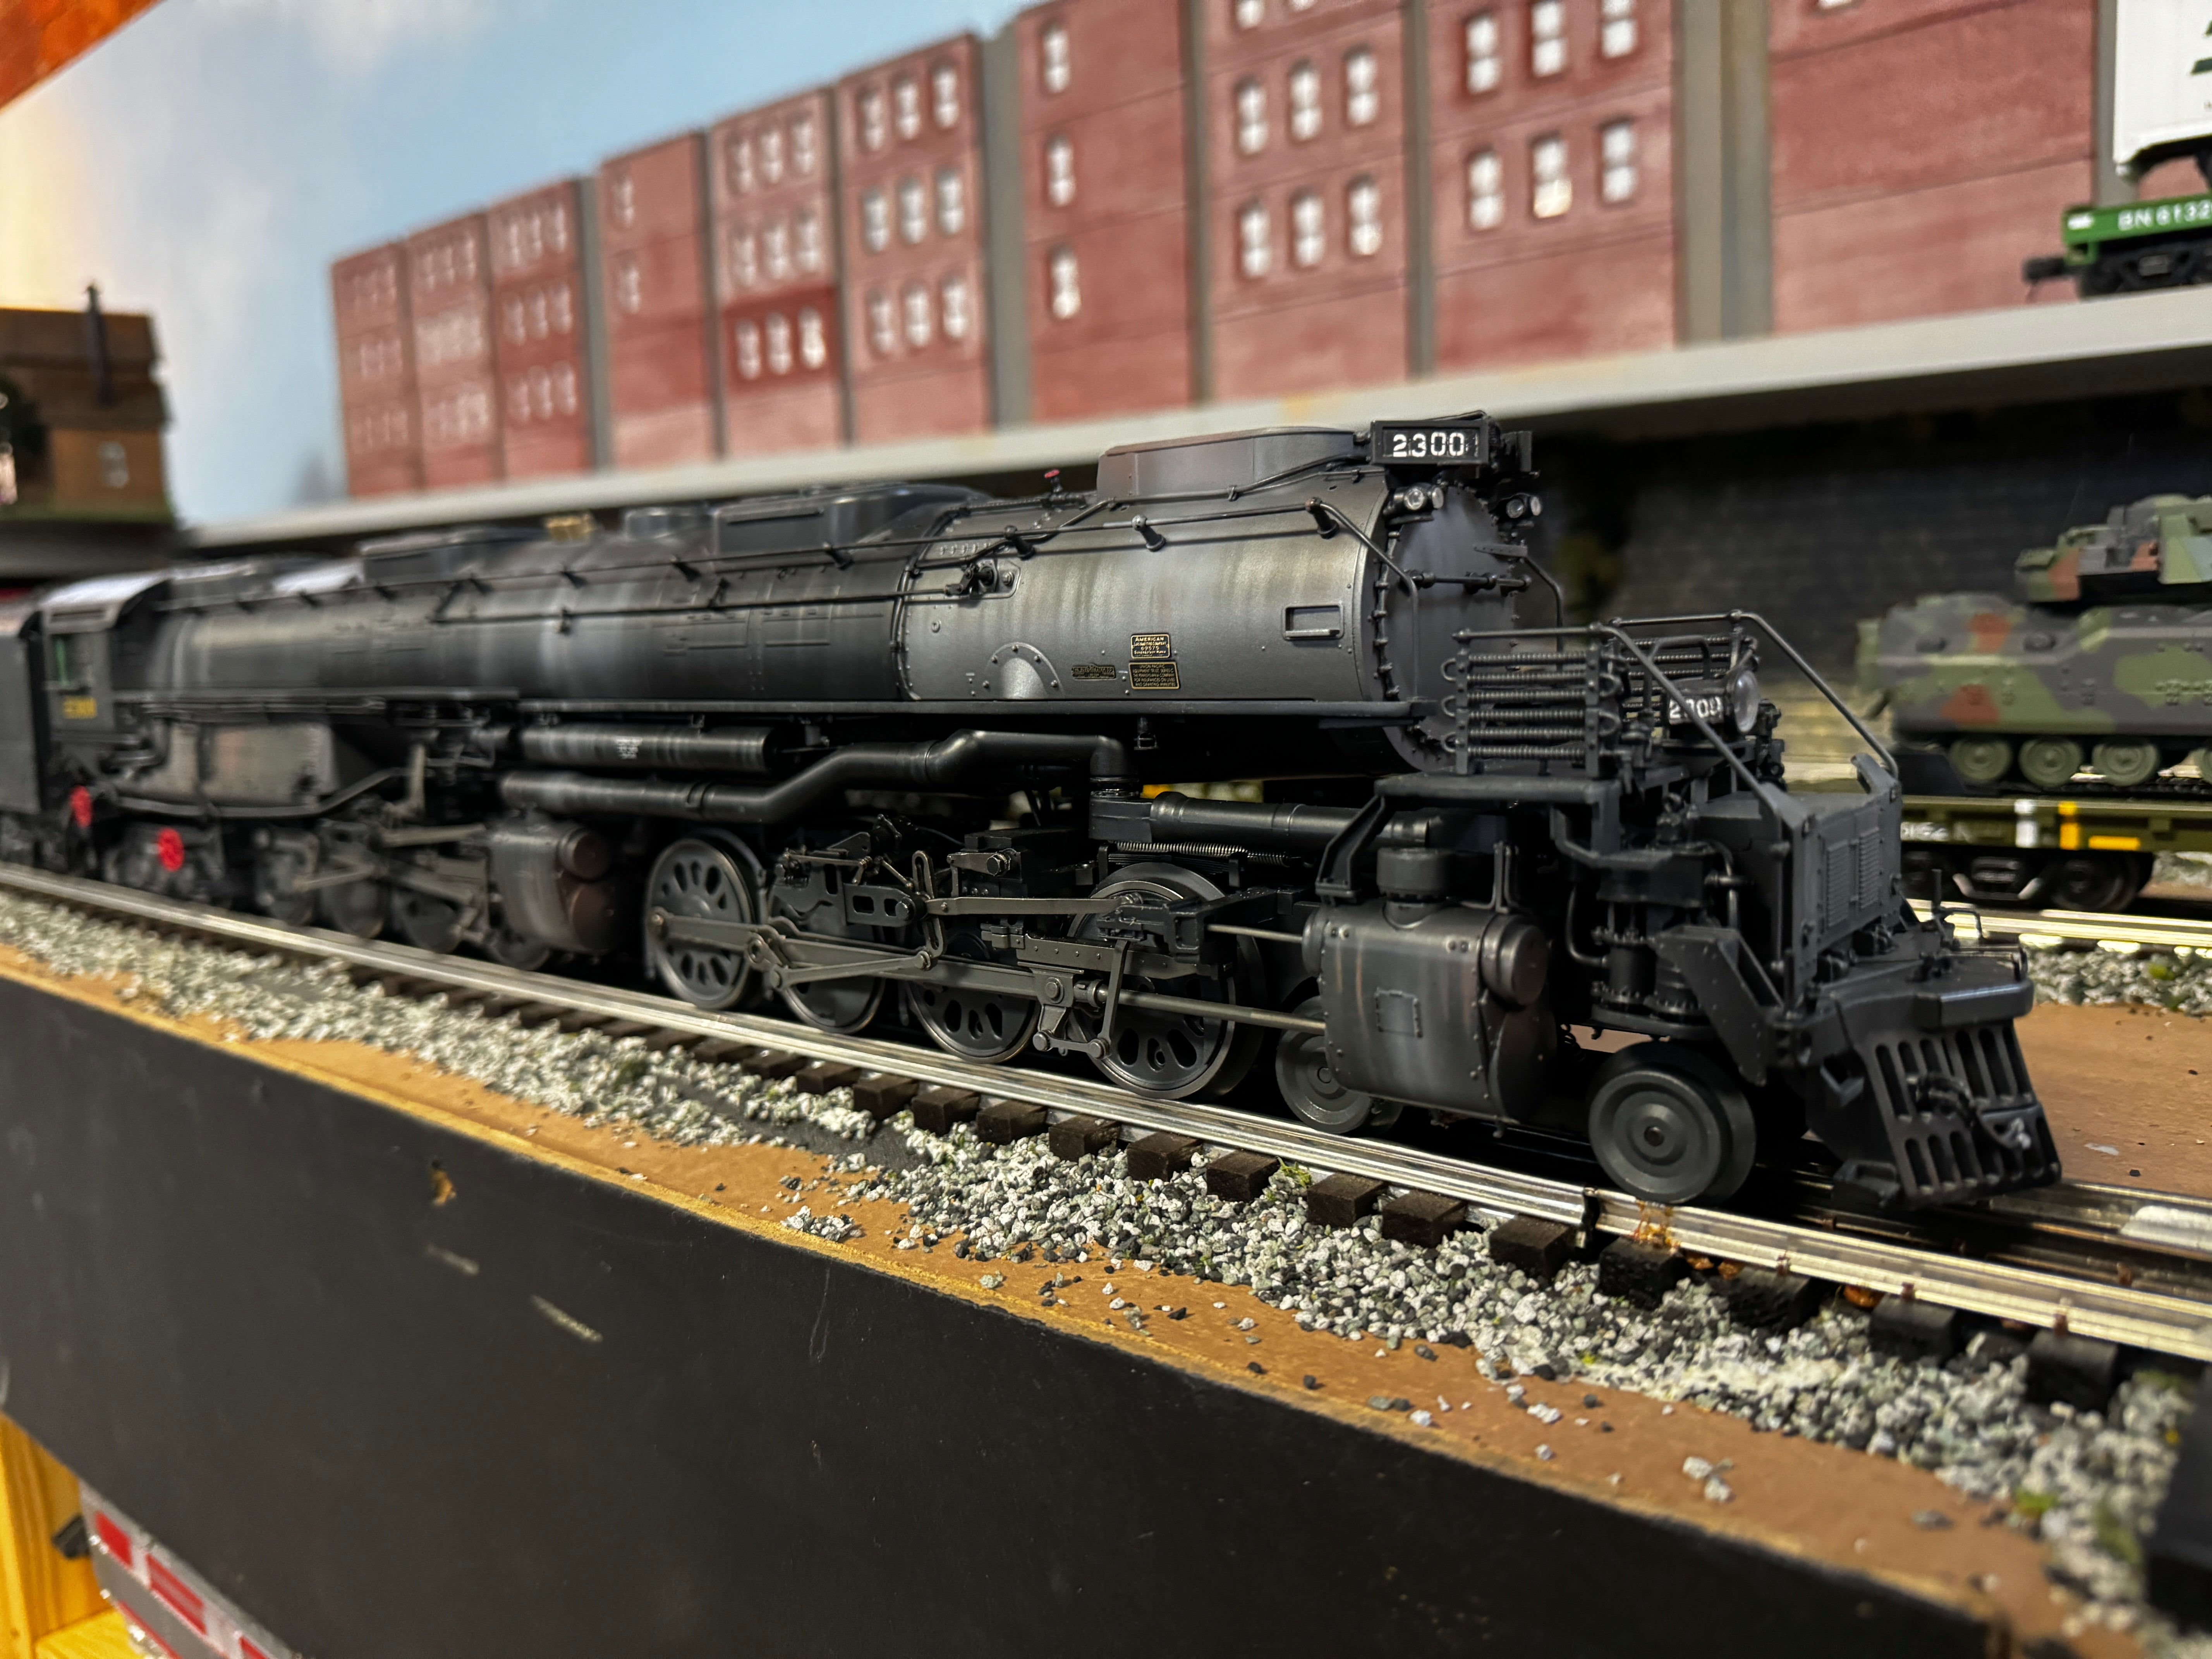 Lionel 2331270NW - Vision Line Big Boy Steam Locomotive "Norfolk & Western" #2300 Custom Pained and Lettered by Harry Hieke